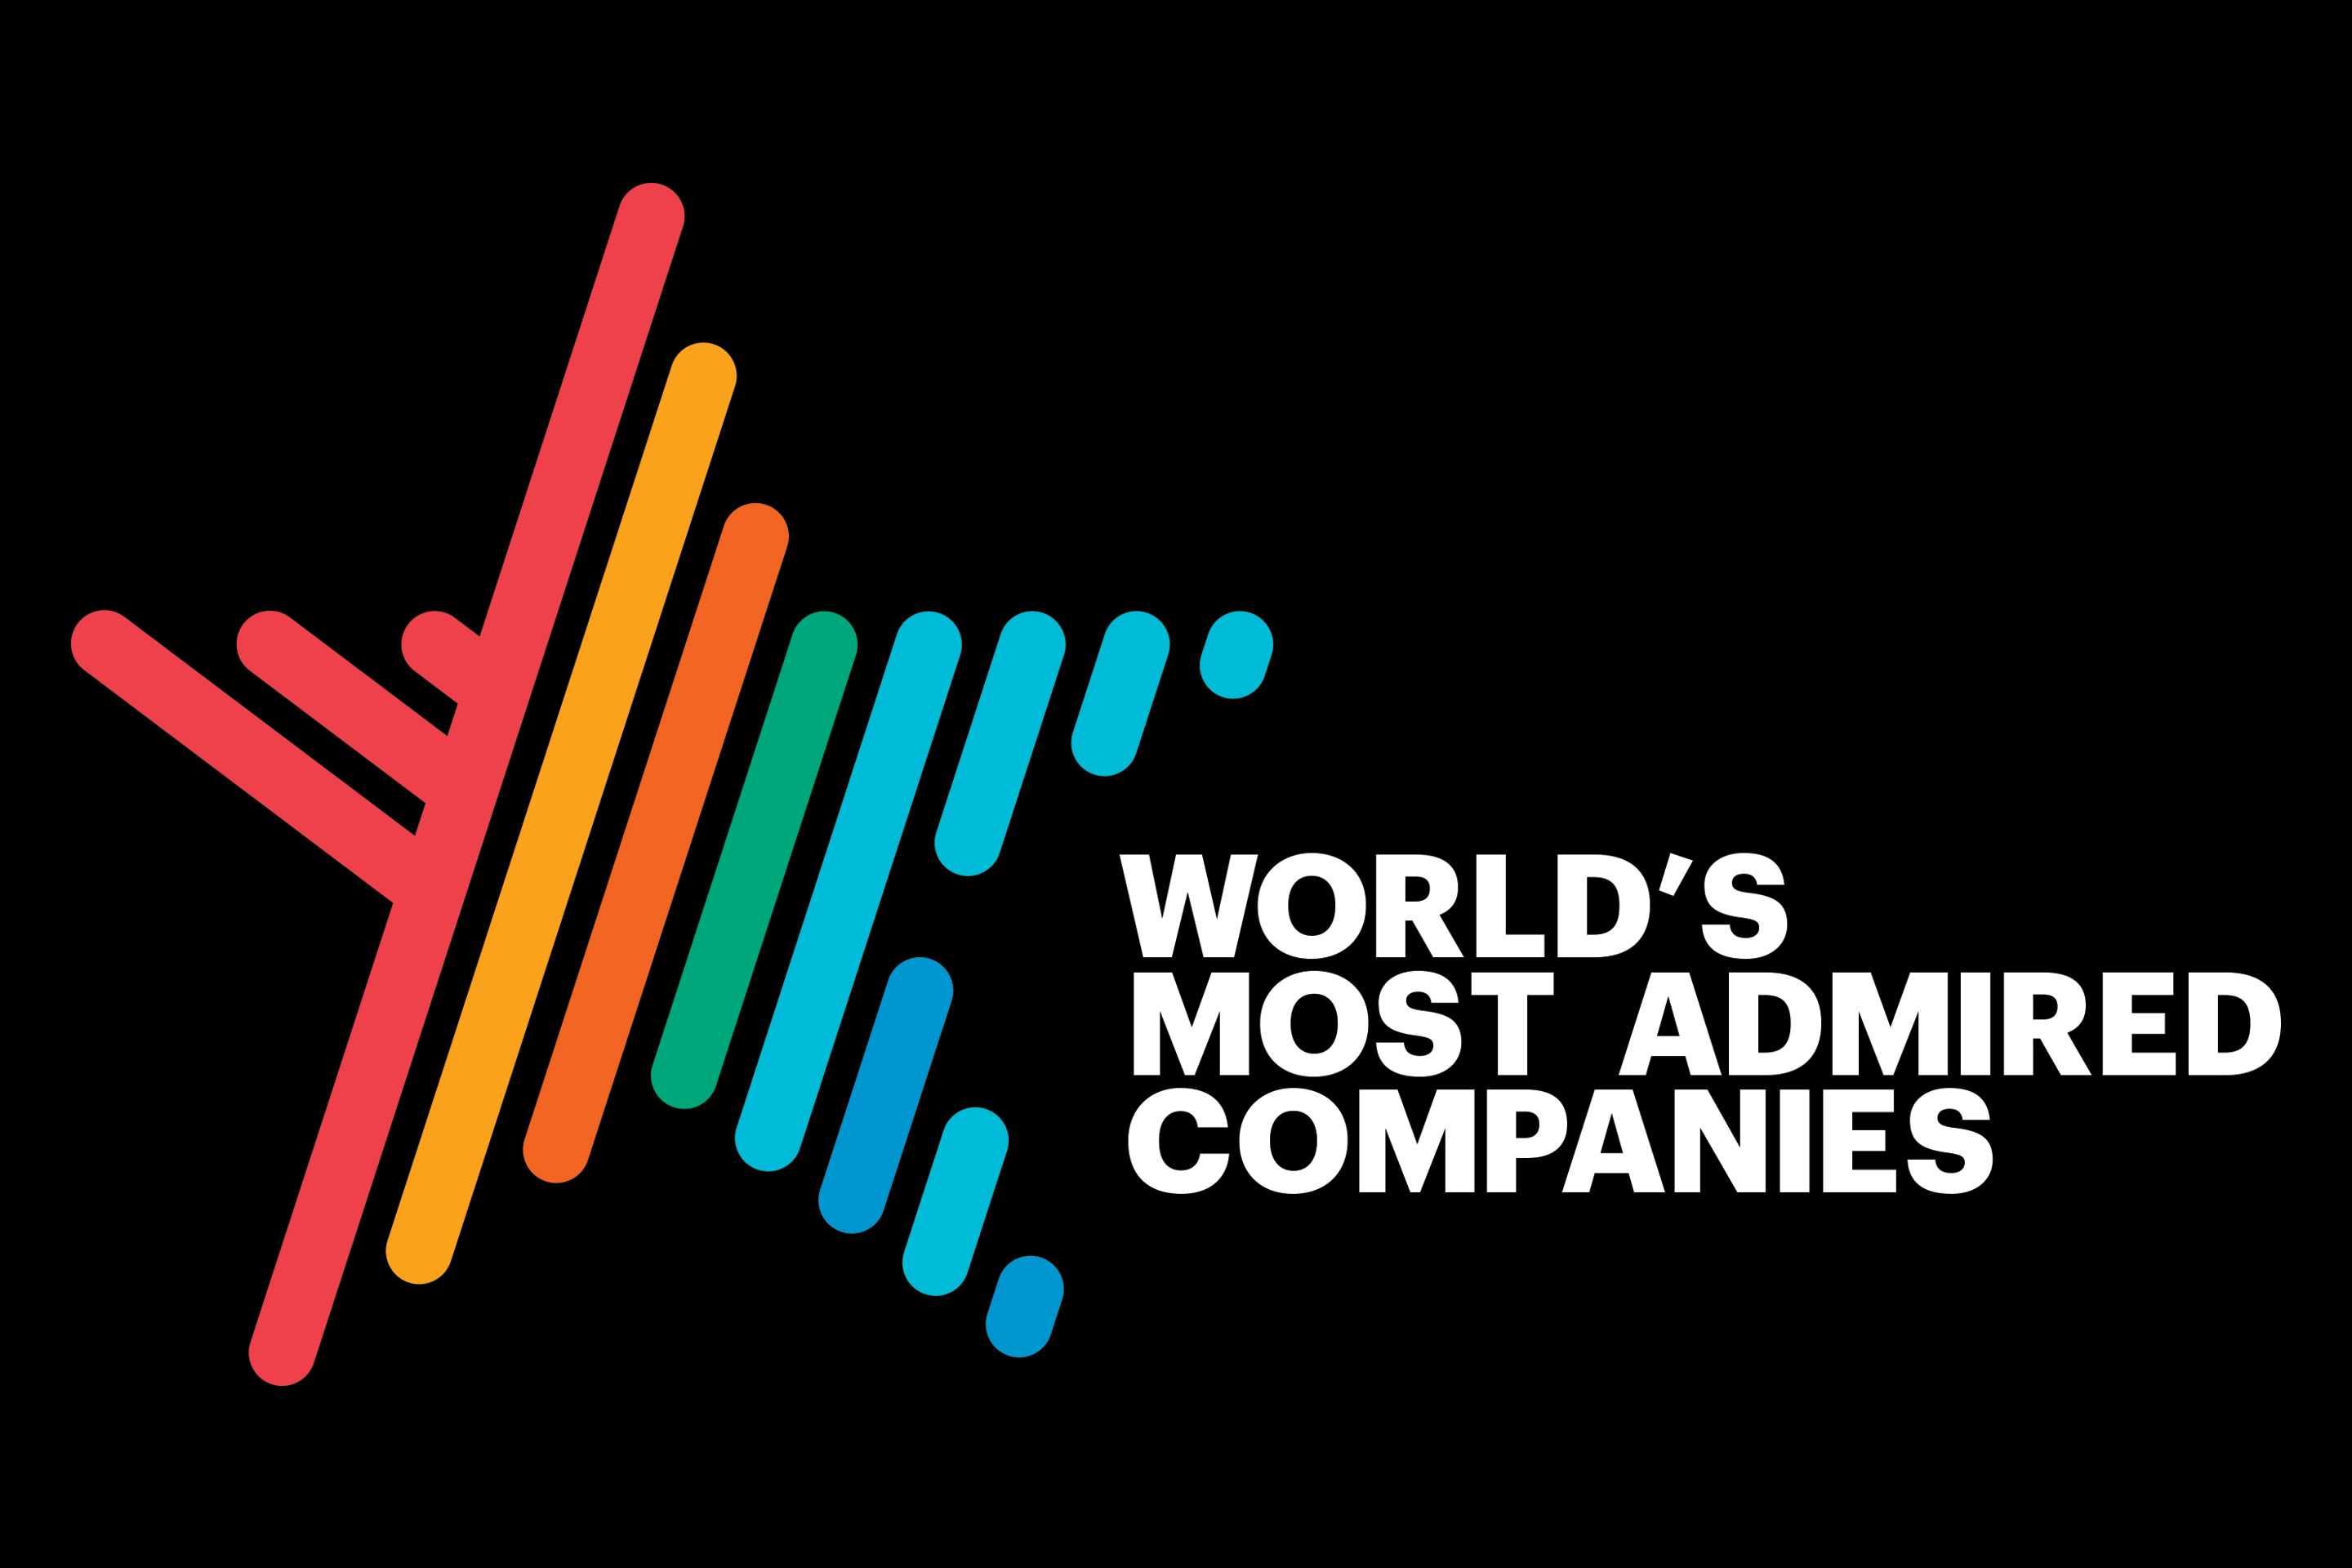 i2B included in “Top 10 Admired Companies in 2021” by DigiTech Insight